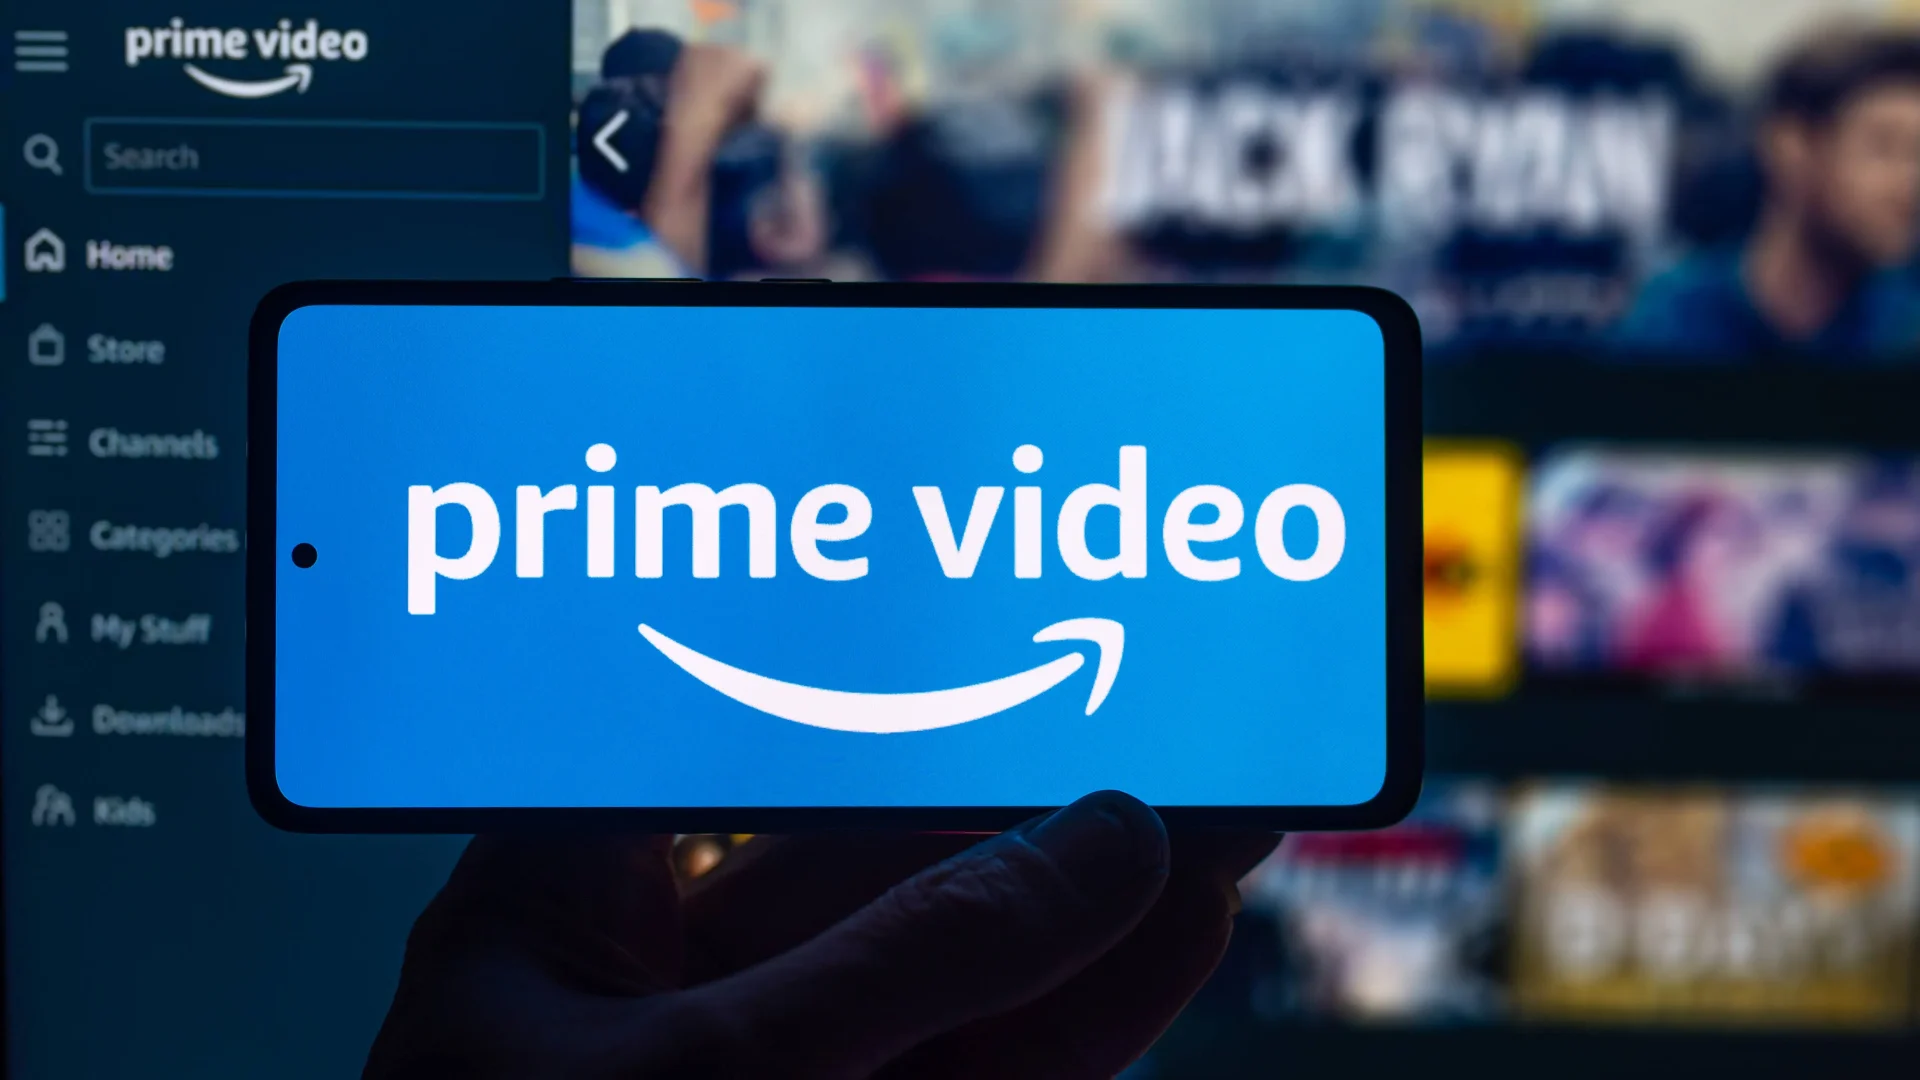 A hand holding up a smartphone screen with the Amazon Prime Video logo, with the Amazon Prime Video application in the background.